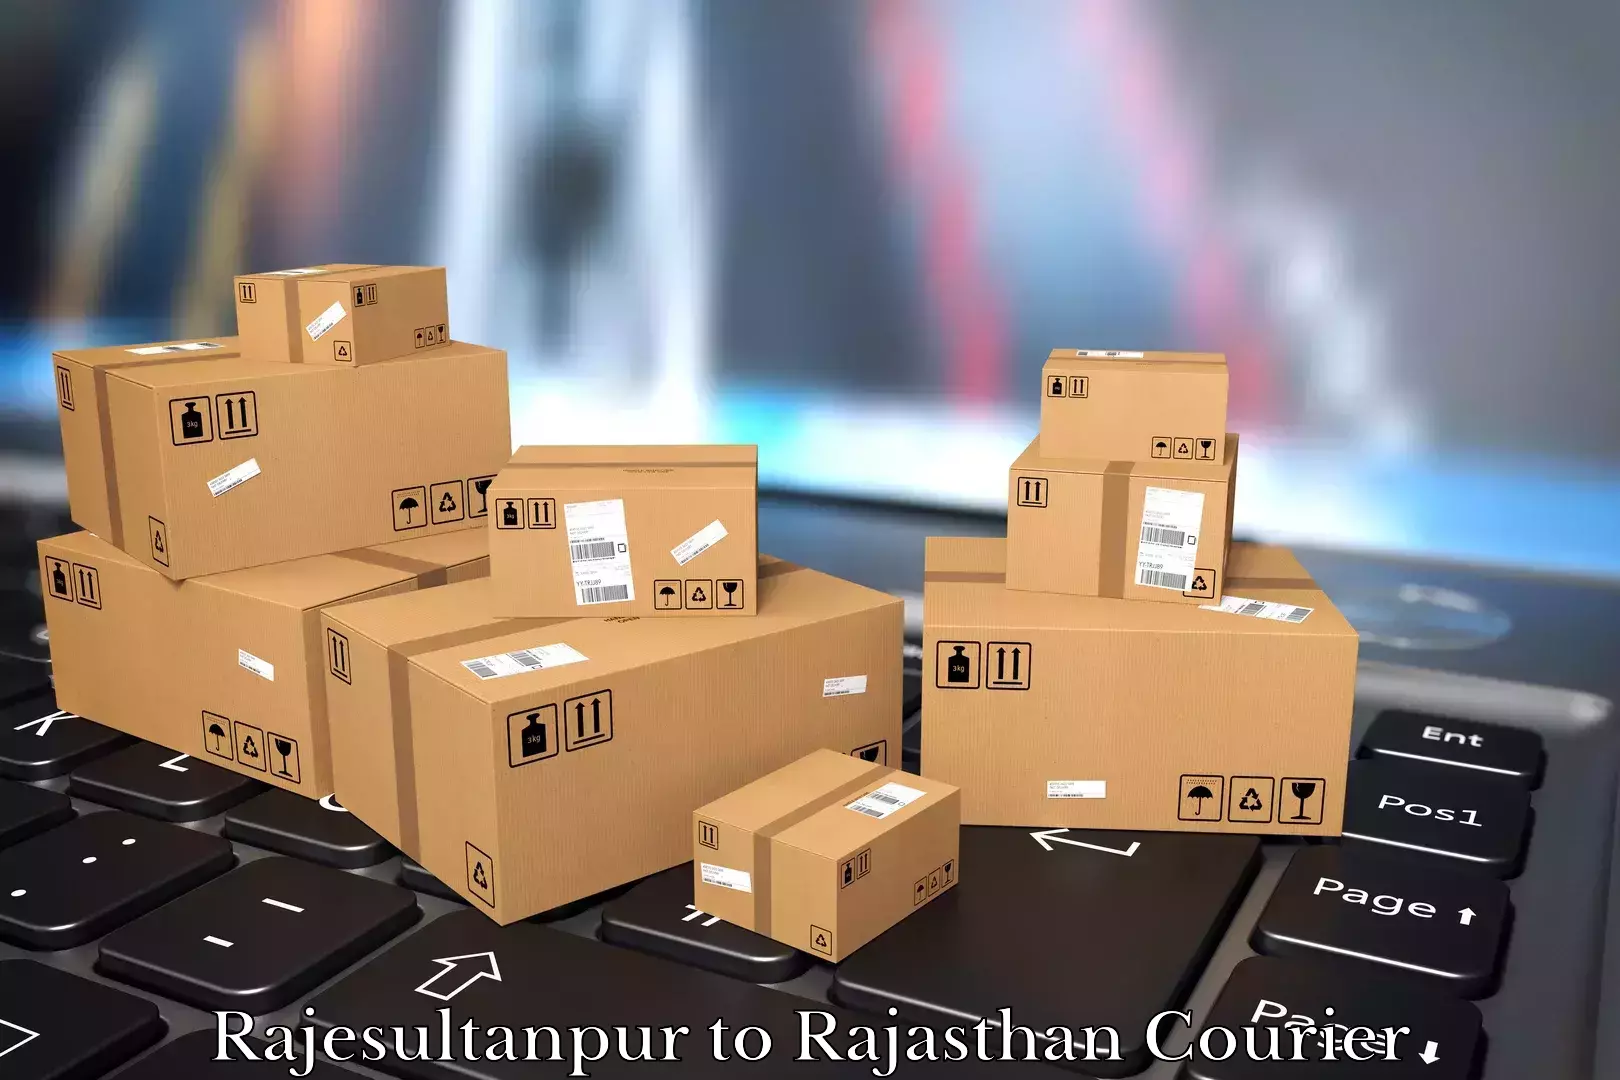 Moving and storage services Rajesultanpur to Mathania